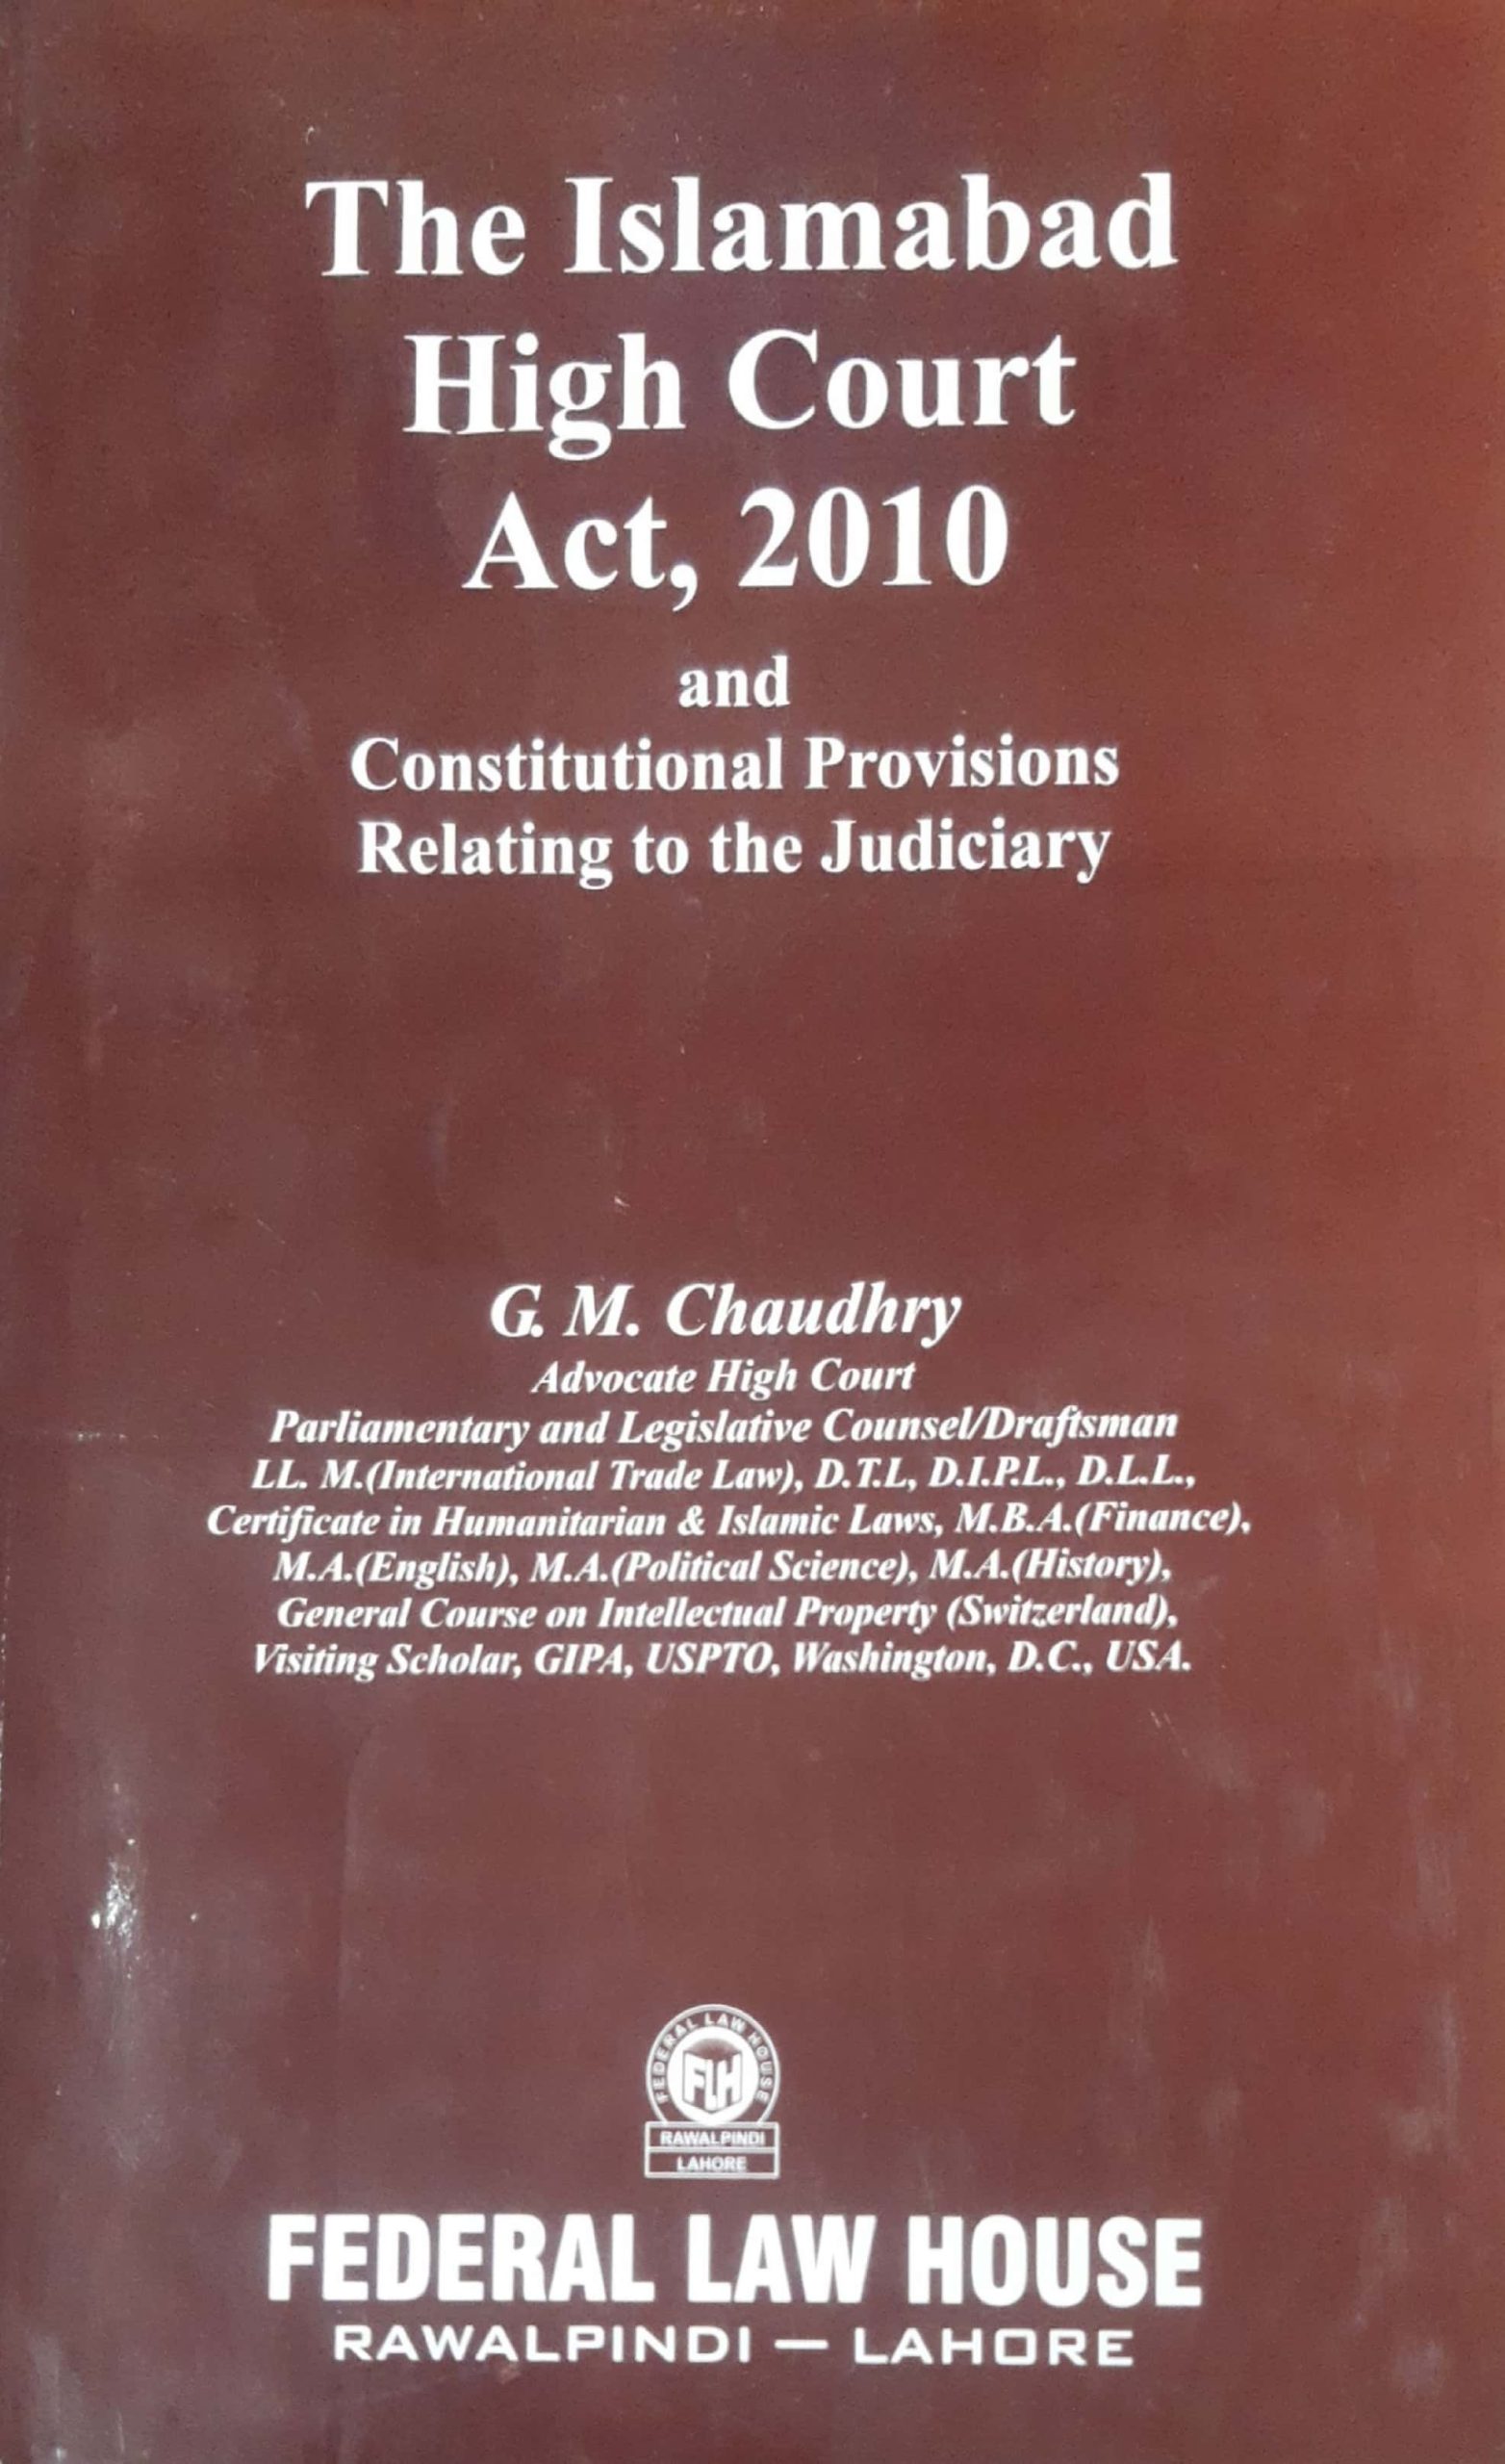 The Islamabad High Court Act, 2010